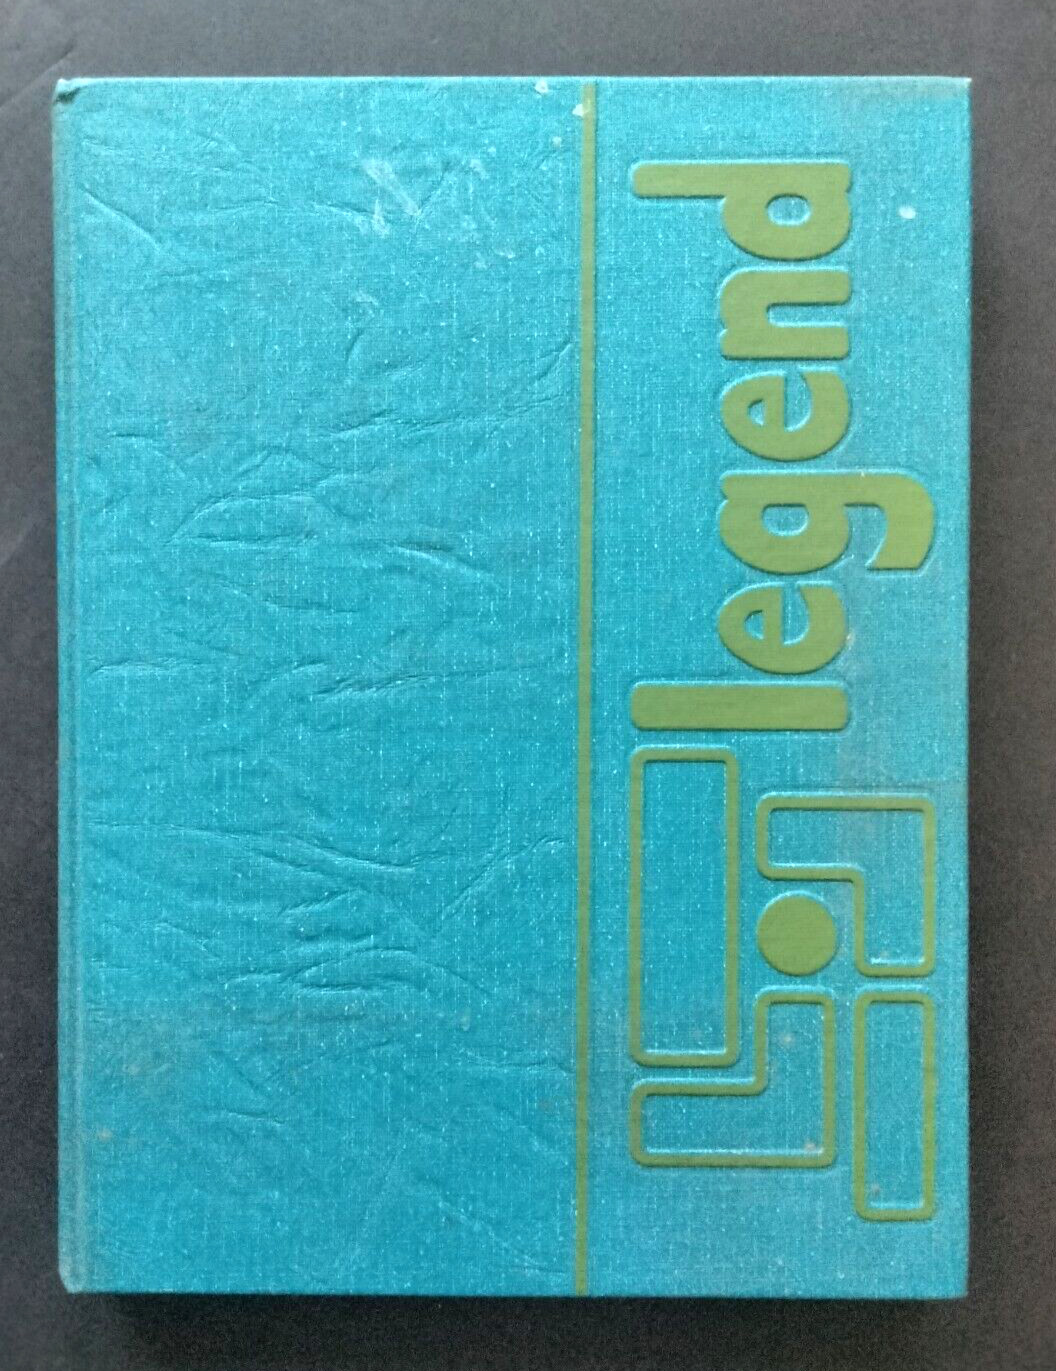 1971 Cleveland High School Yearbook Portland, Oregon Hardcover - Pre-owned